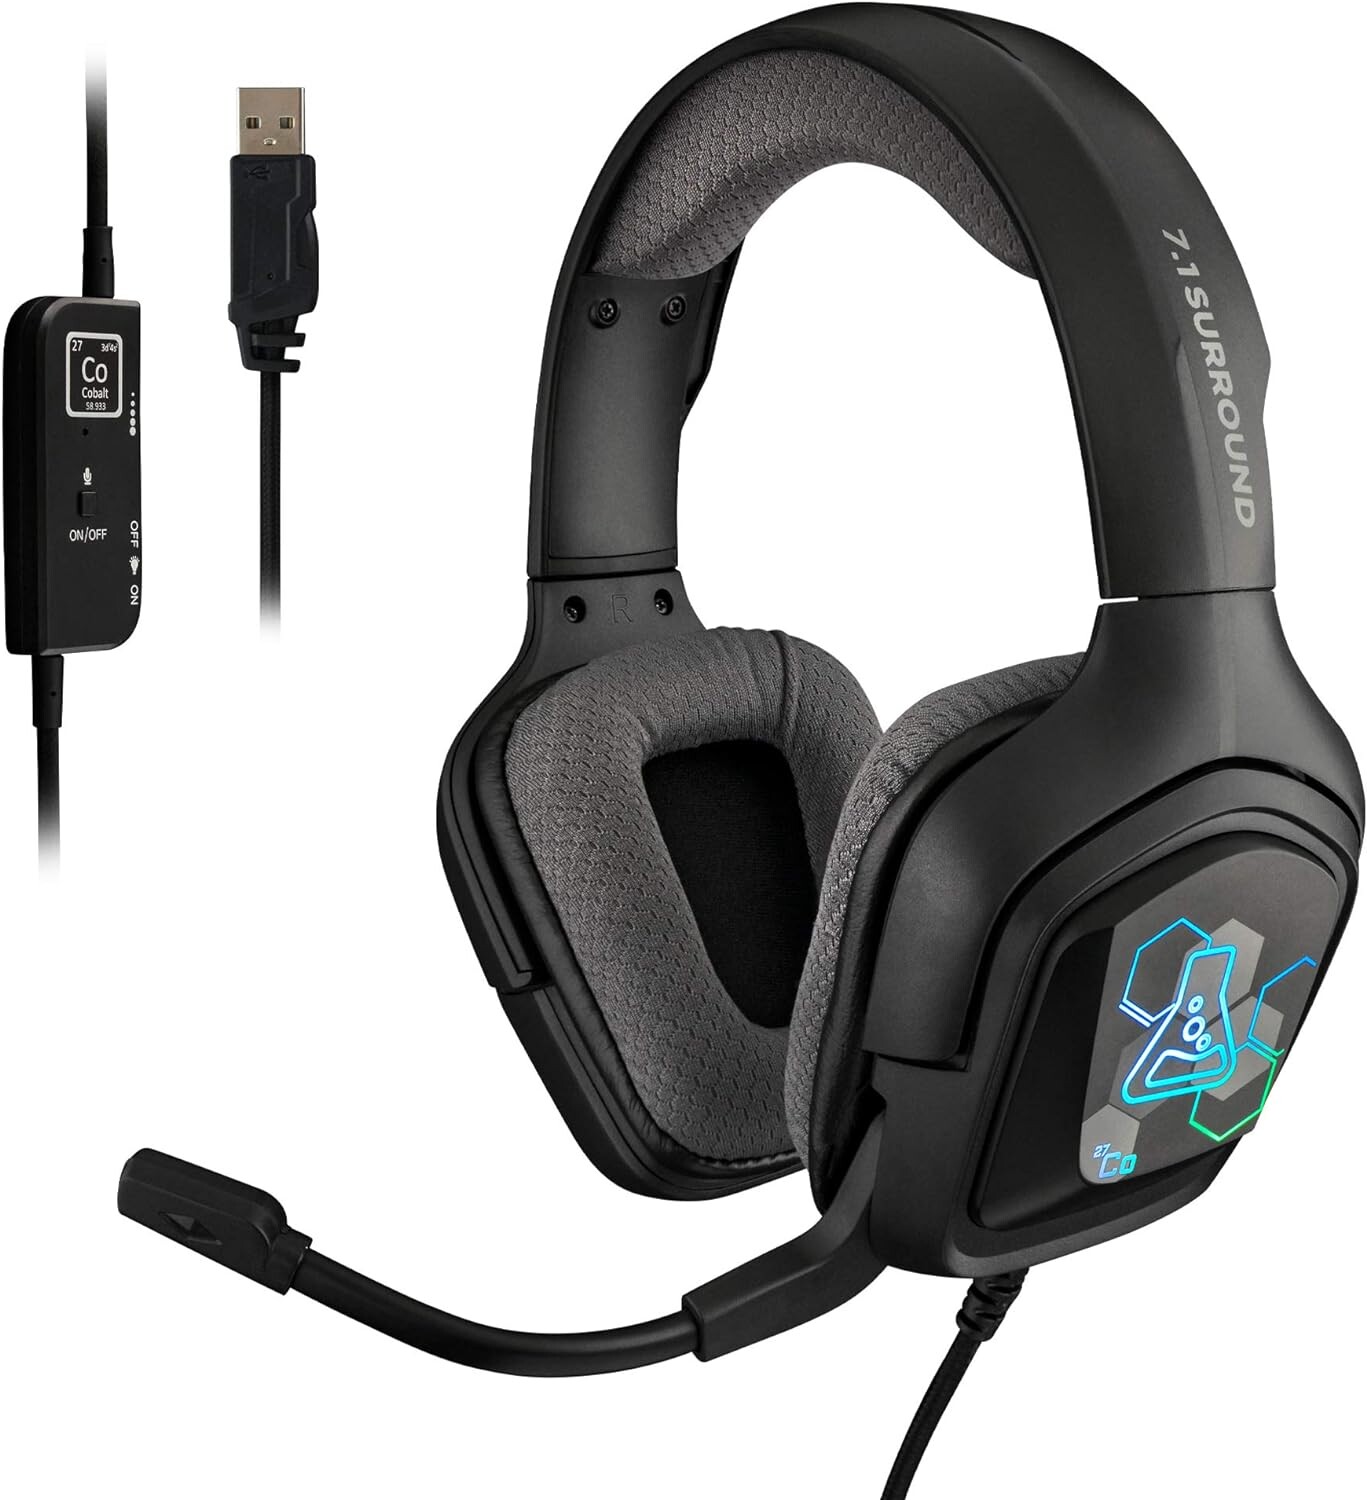 Casque Gaming LED avec micro et son Surround 7.1 GHS-250 Mod-IT, Casques  Gaming